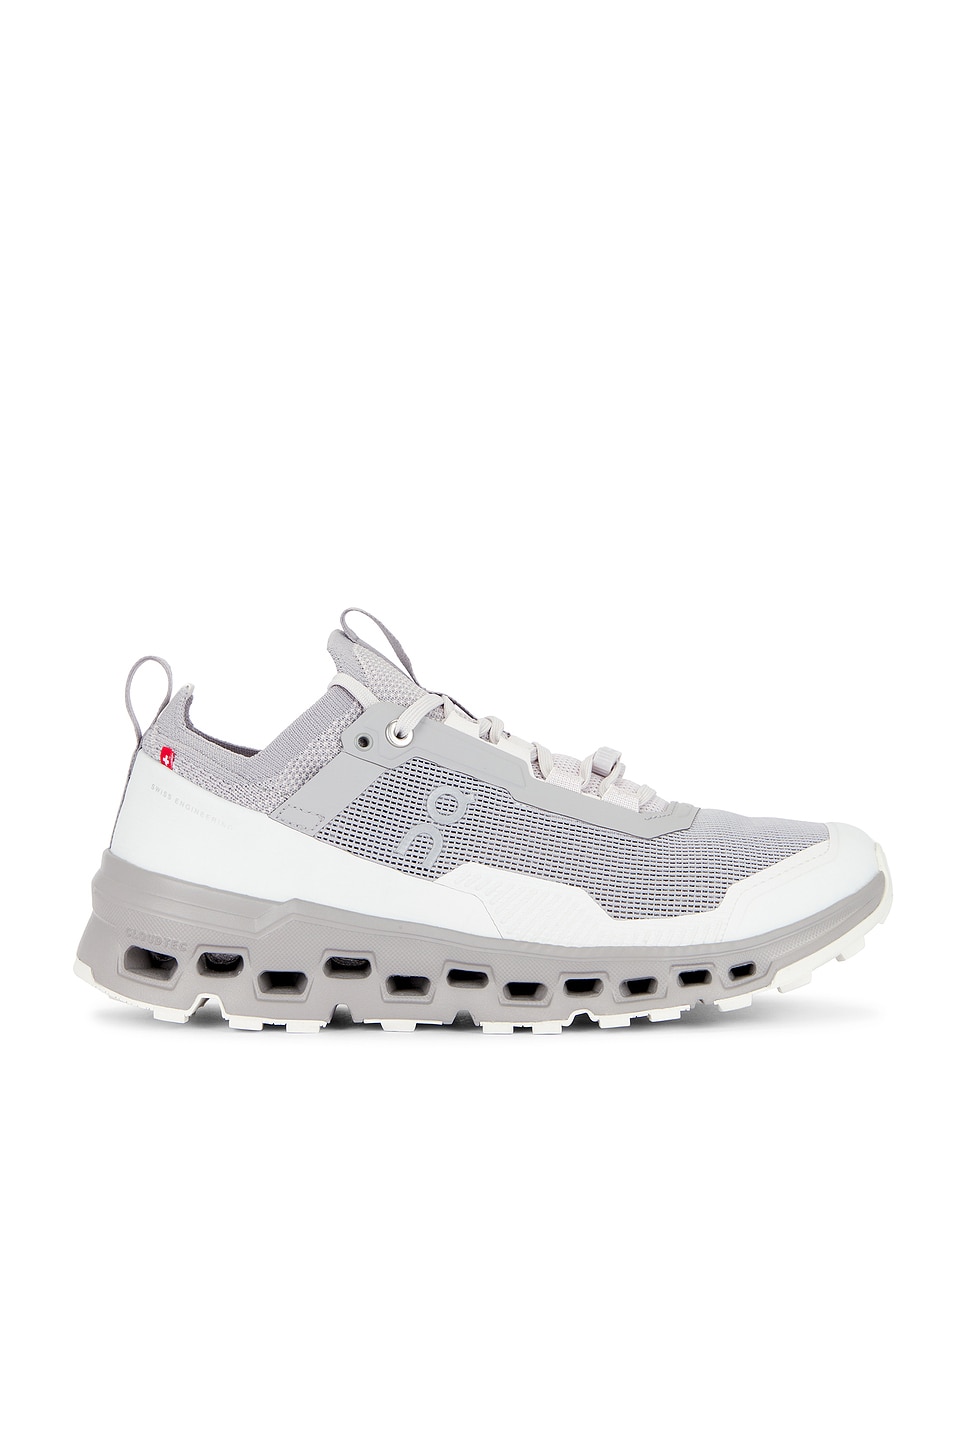 Image 1 of On Cloudultra 2 Po Sneaker in Fog & Ice